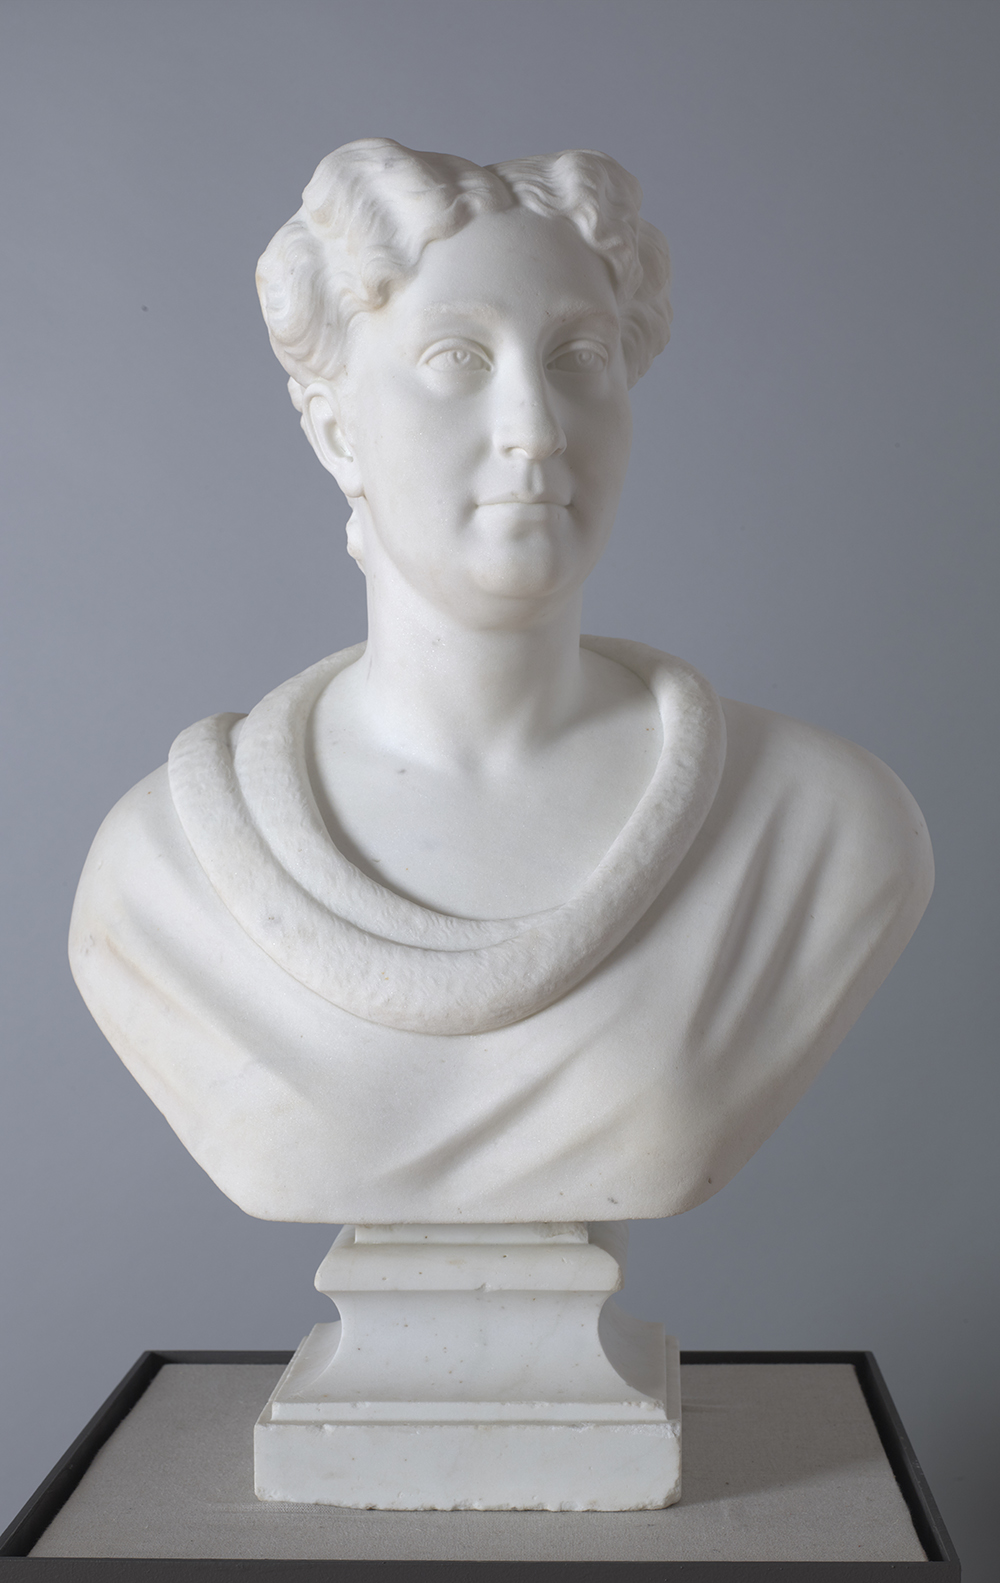 Marble bust of a woman of white European descend with a middle-parted hairstyle and an open-necked blouse